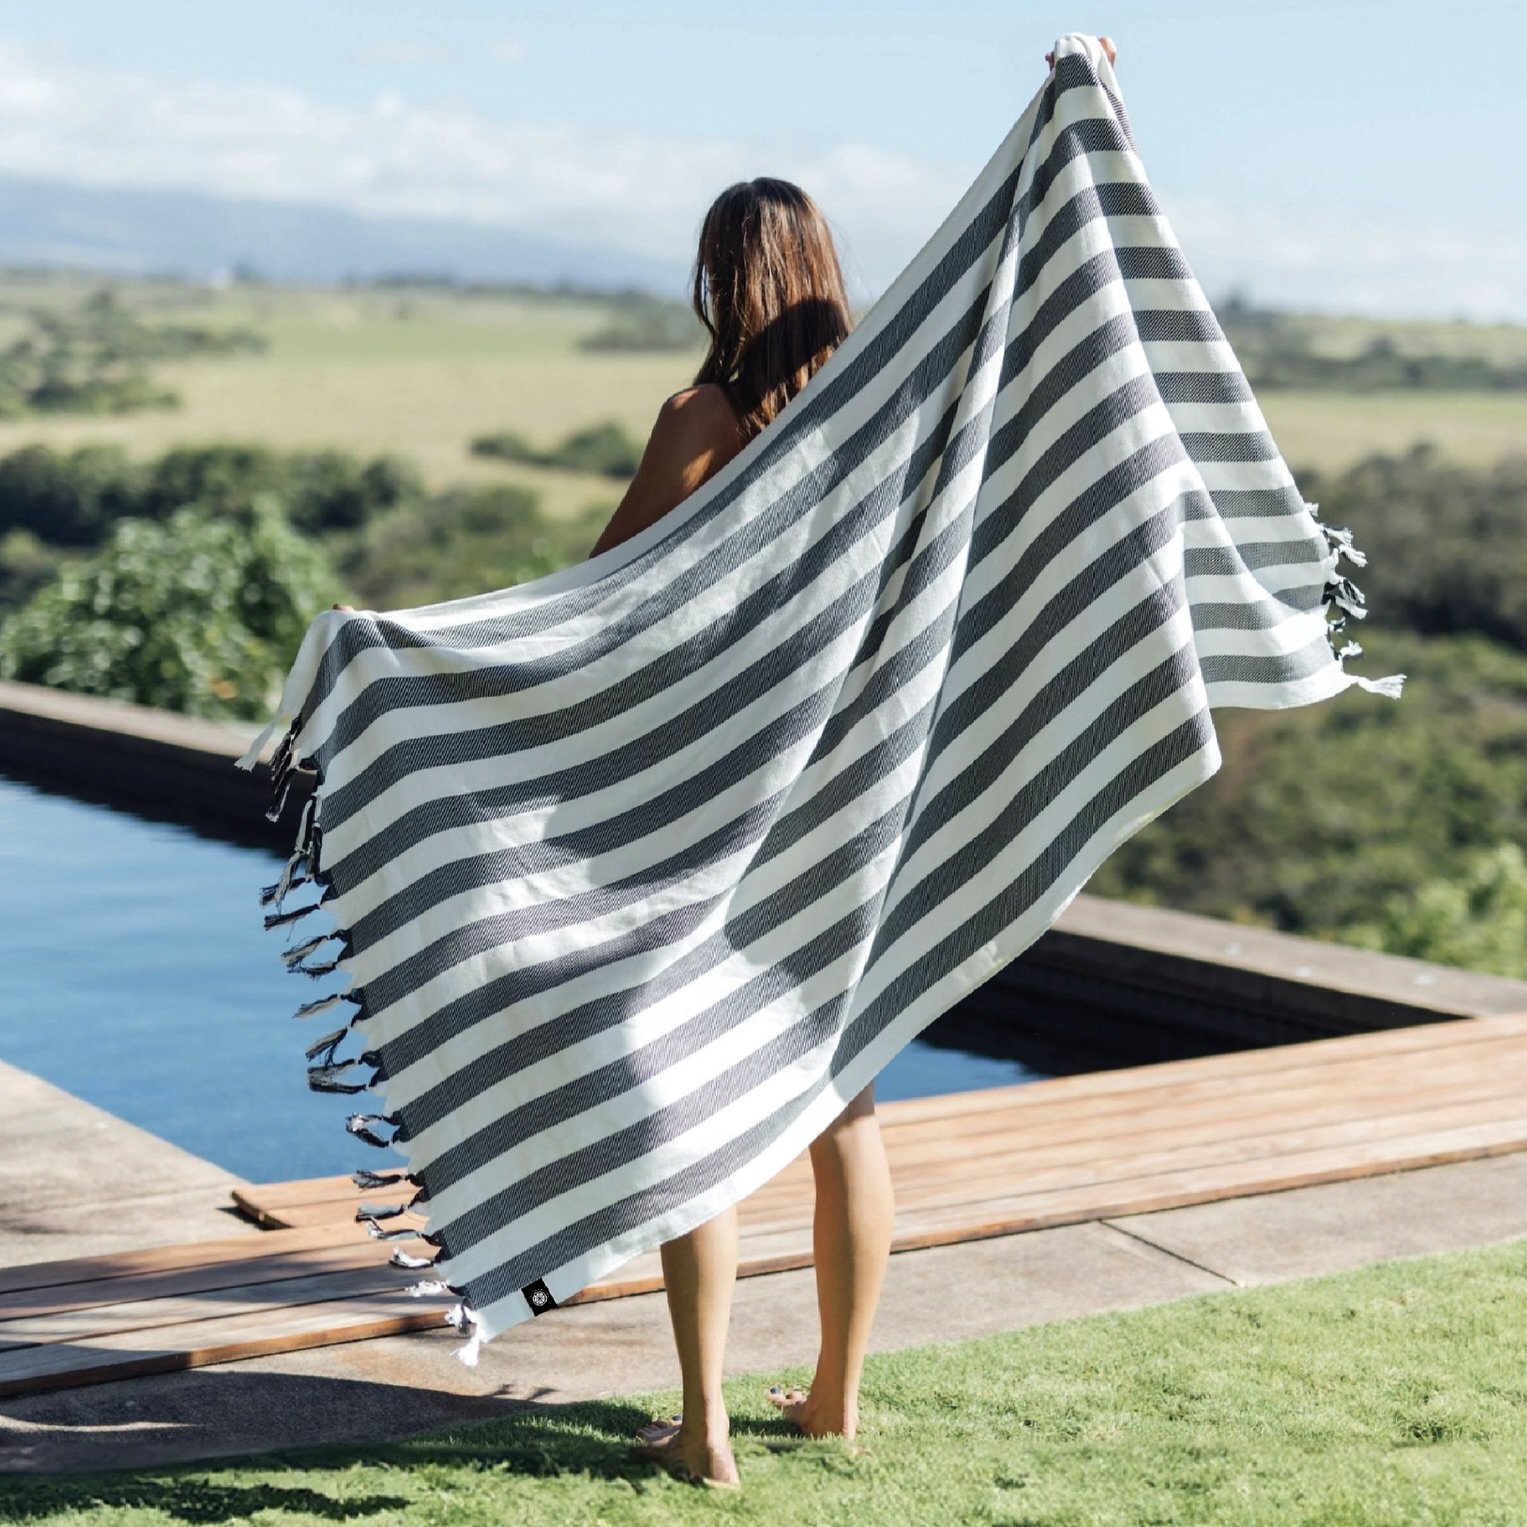 Beat the heat this summer in style with thin branded beach towels! Lightweight, easy to pack, and a perfect way to showcase your brand&rsquo;s identity by the pool, lake, or shore. We are your partner in creating solutions to keep your business thriv